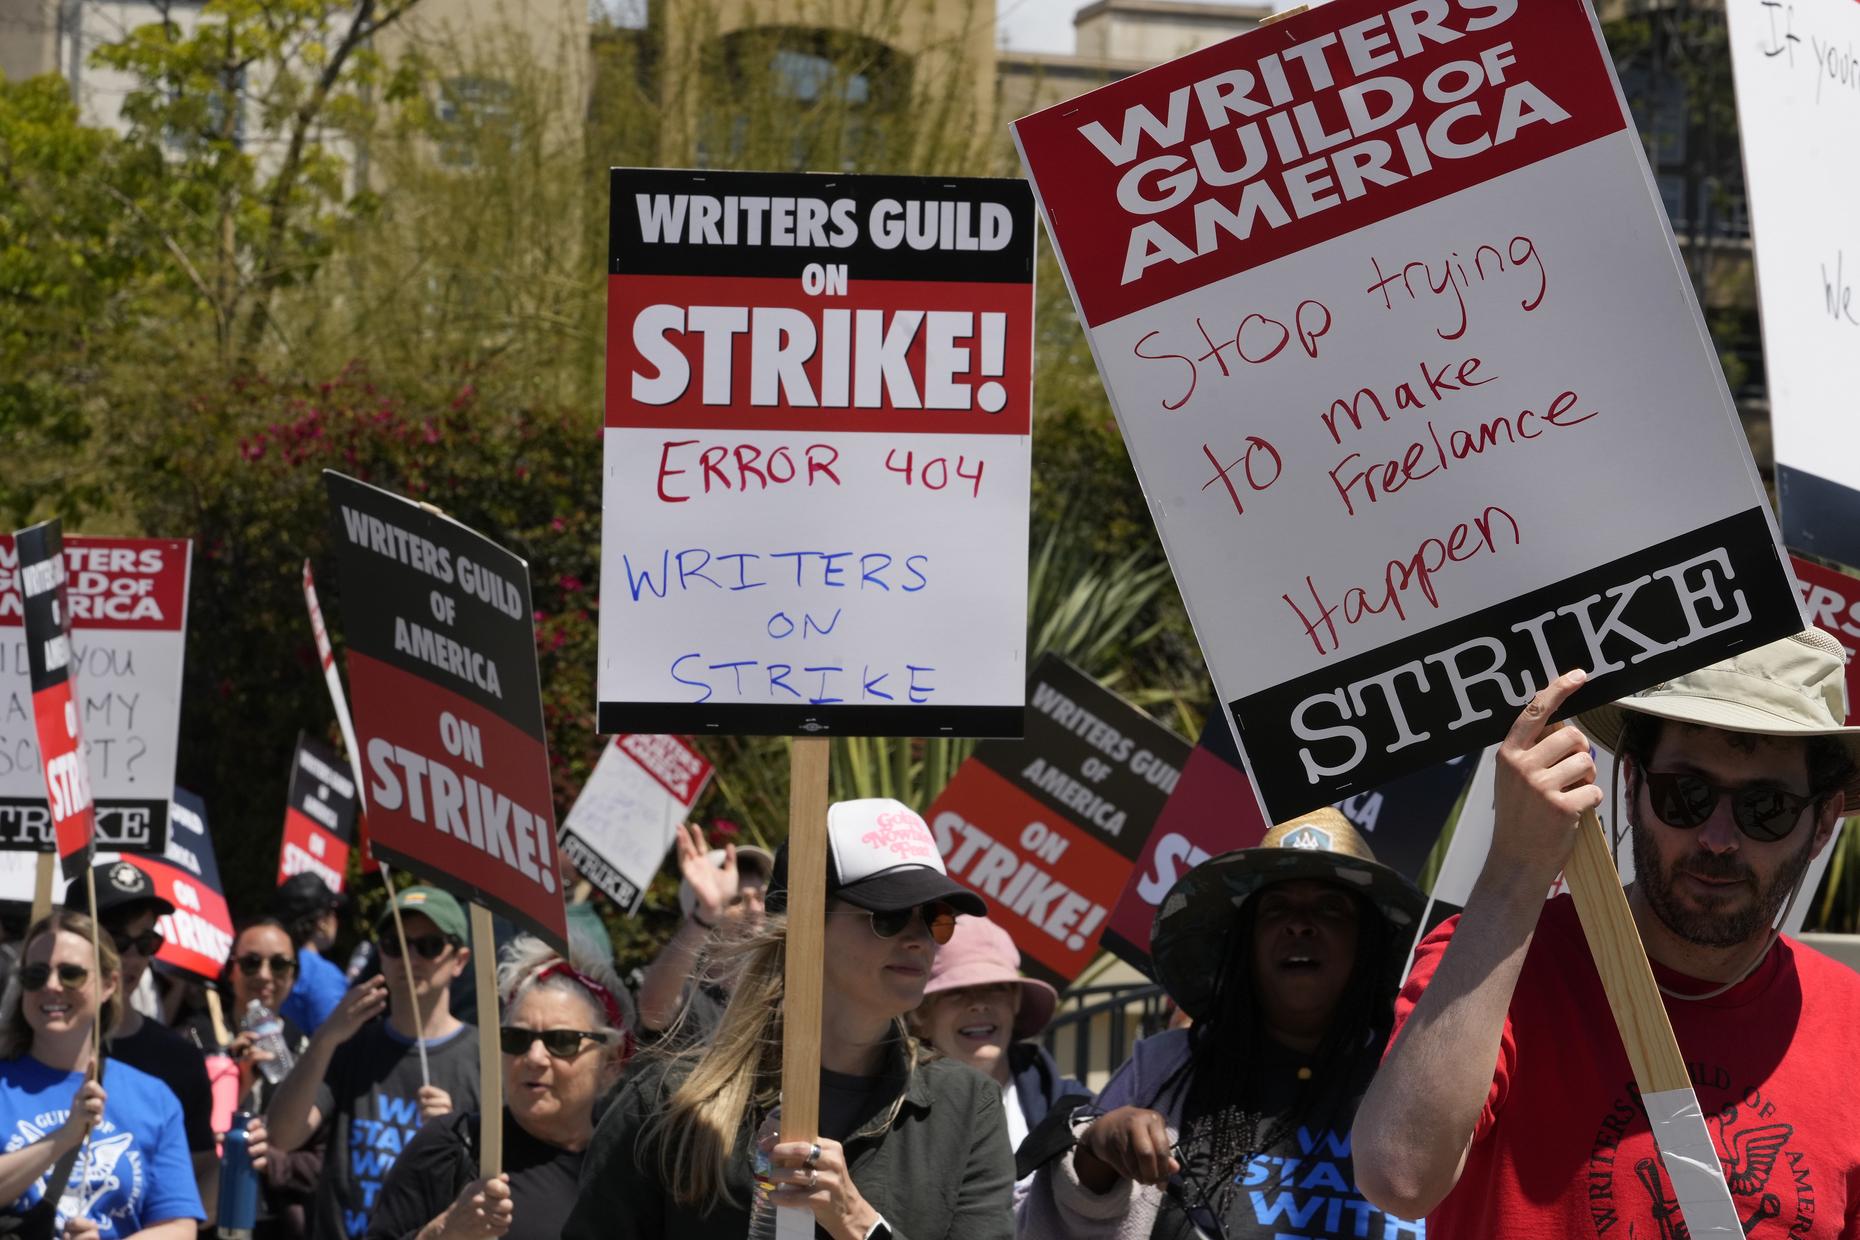 Debunking Myths About the Writers’ Strike